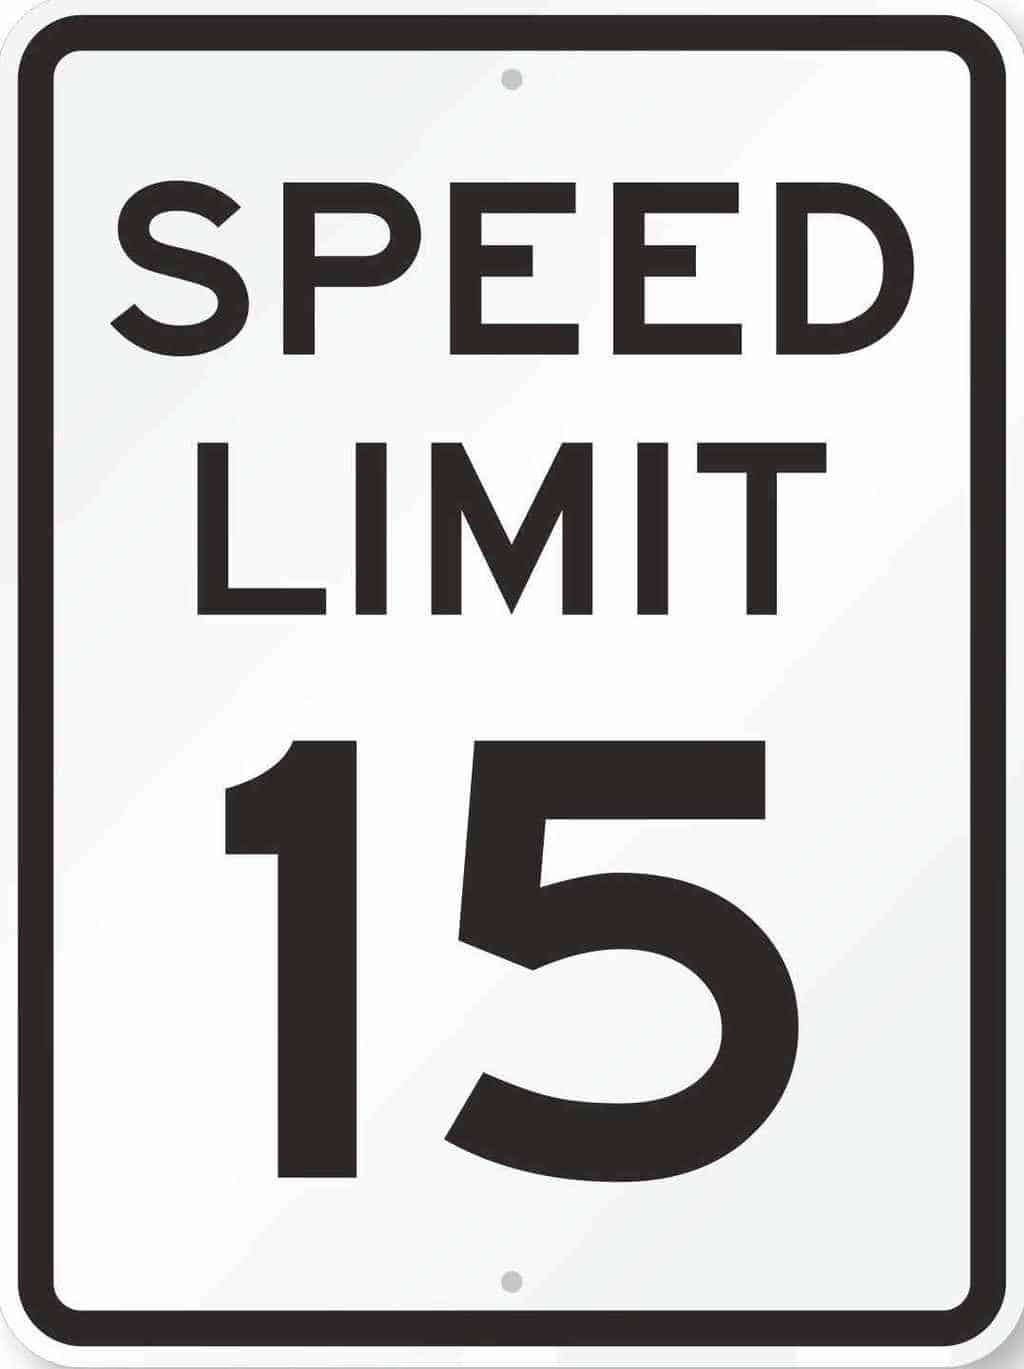 Long Beach Township is lowering speed limits to 15 MPH on the ocean roads